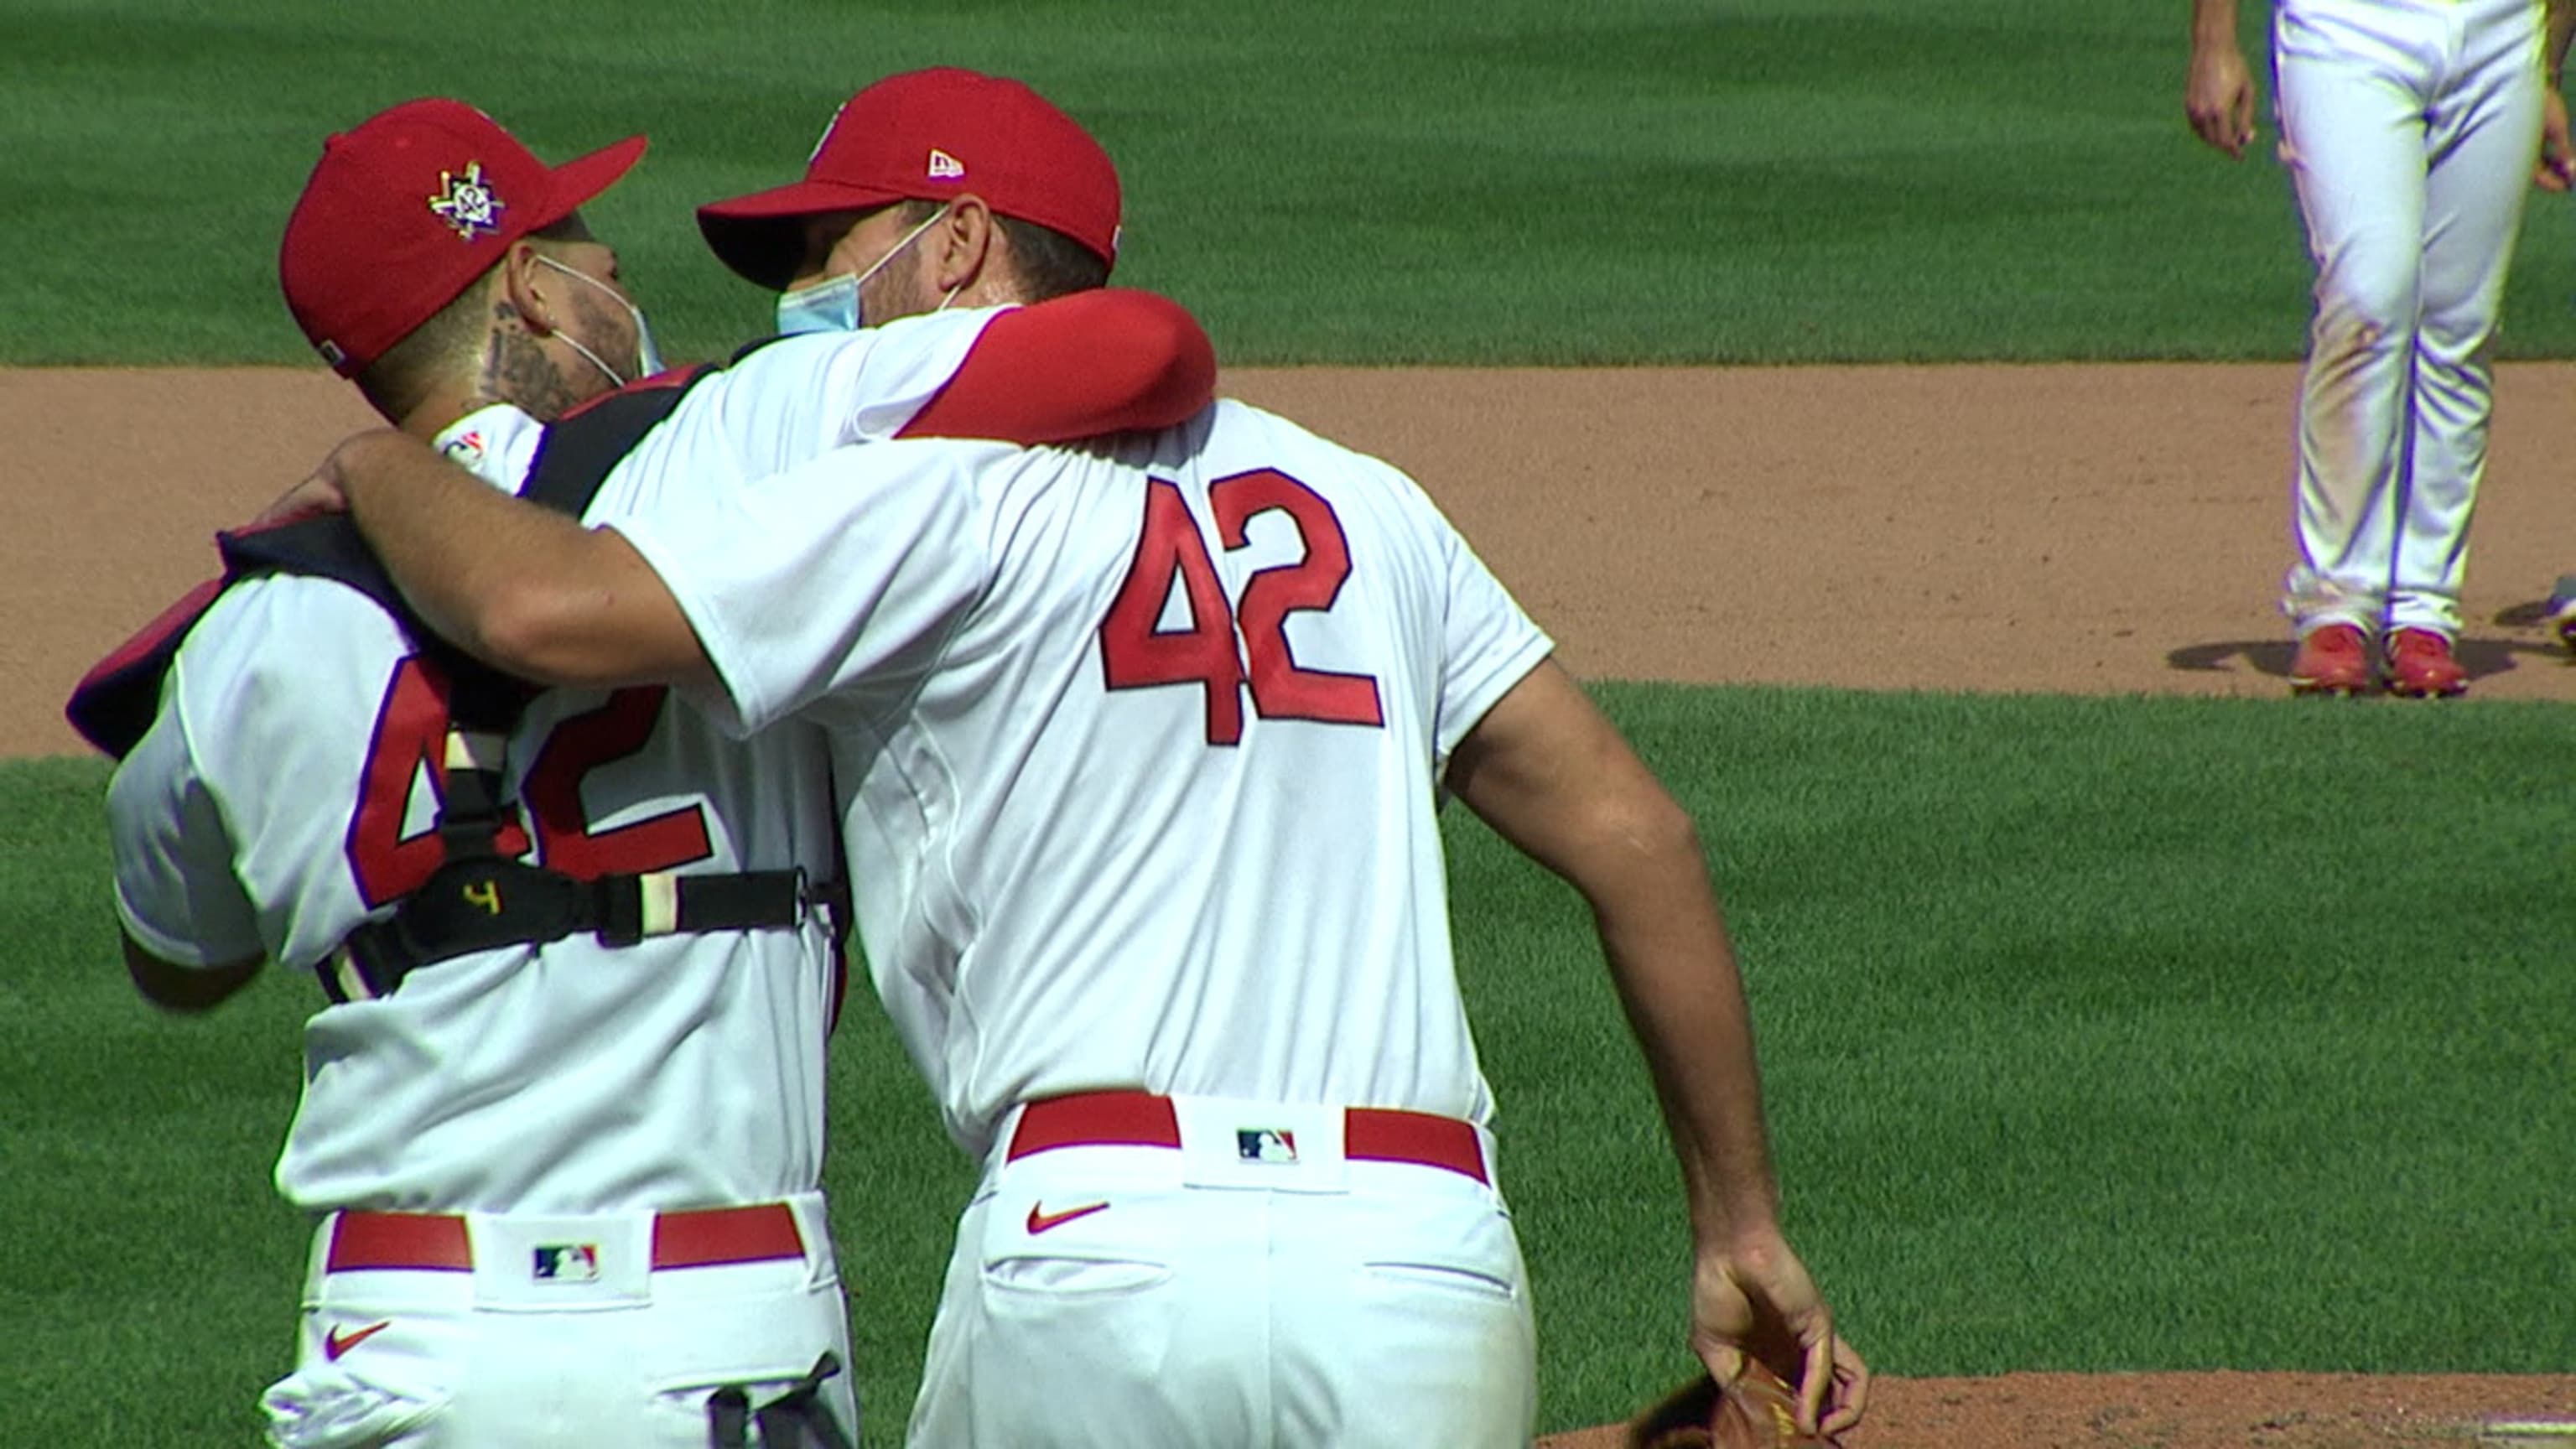 Rosenthal: Inside Adam Wainwright's mound visit from Andy Pettitte